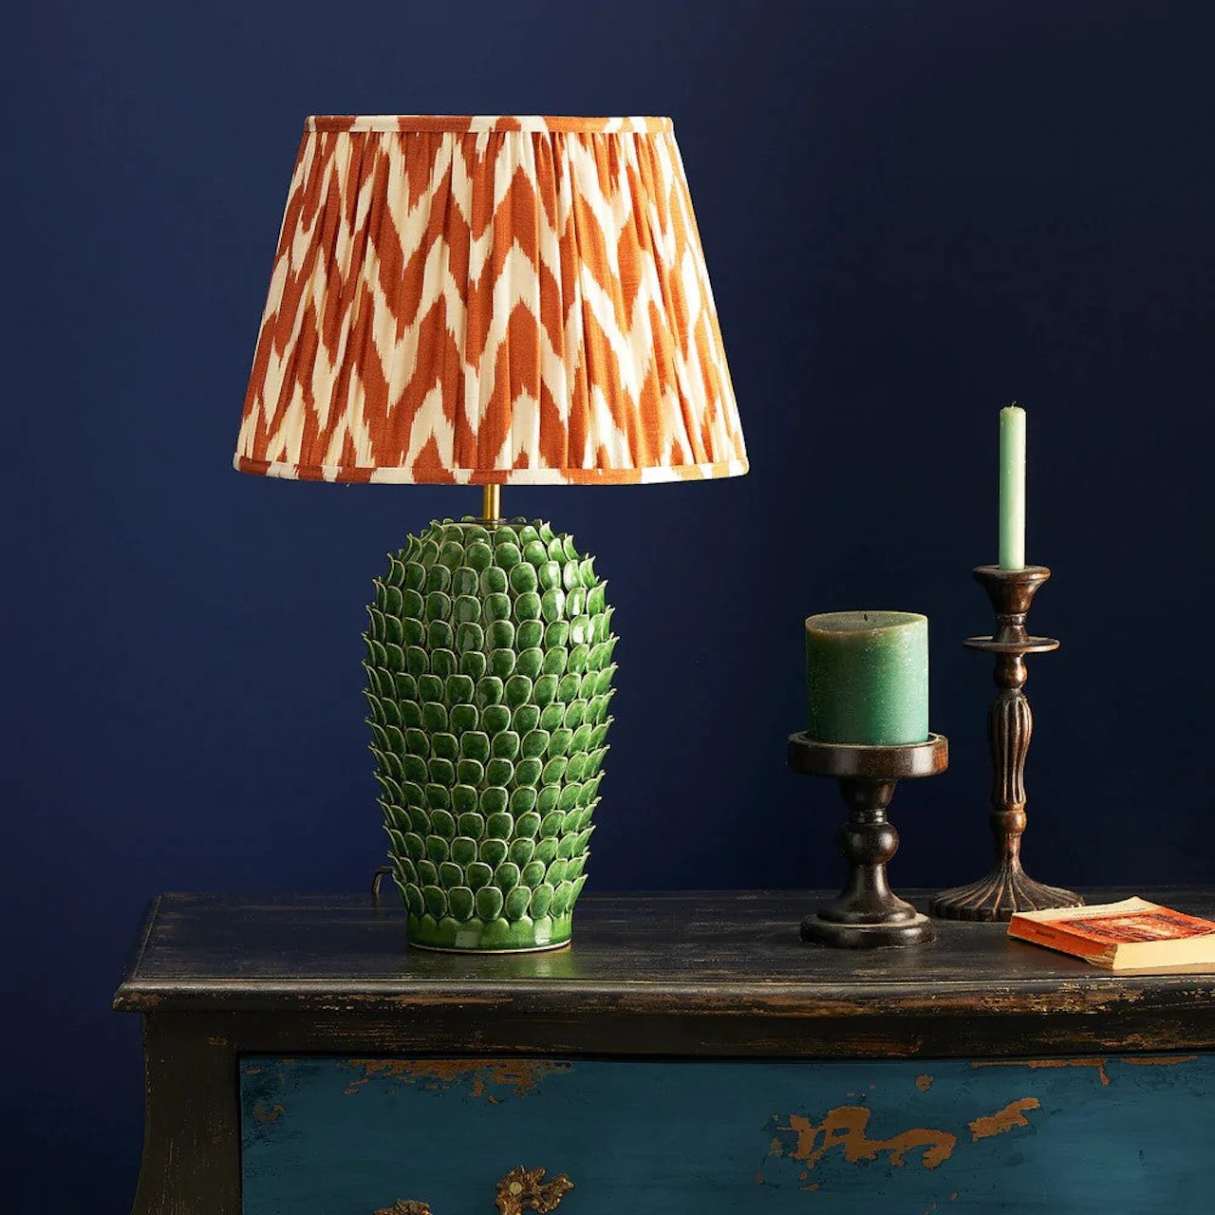 What Are The Different Types Of Lamp Shades Called